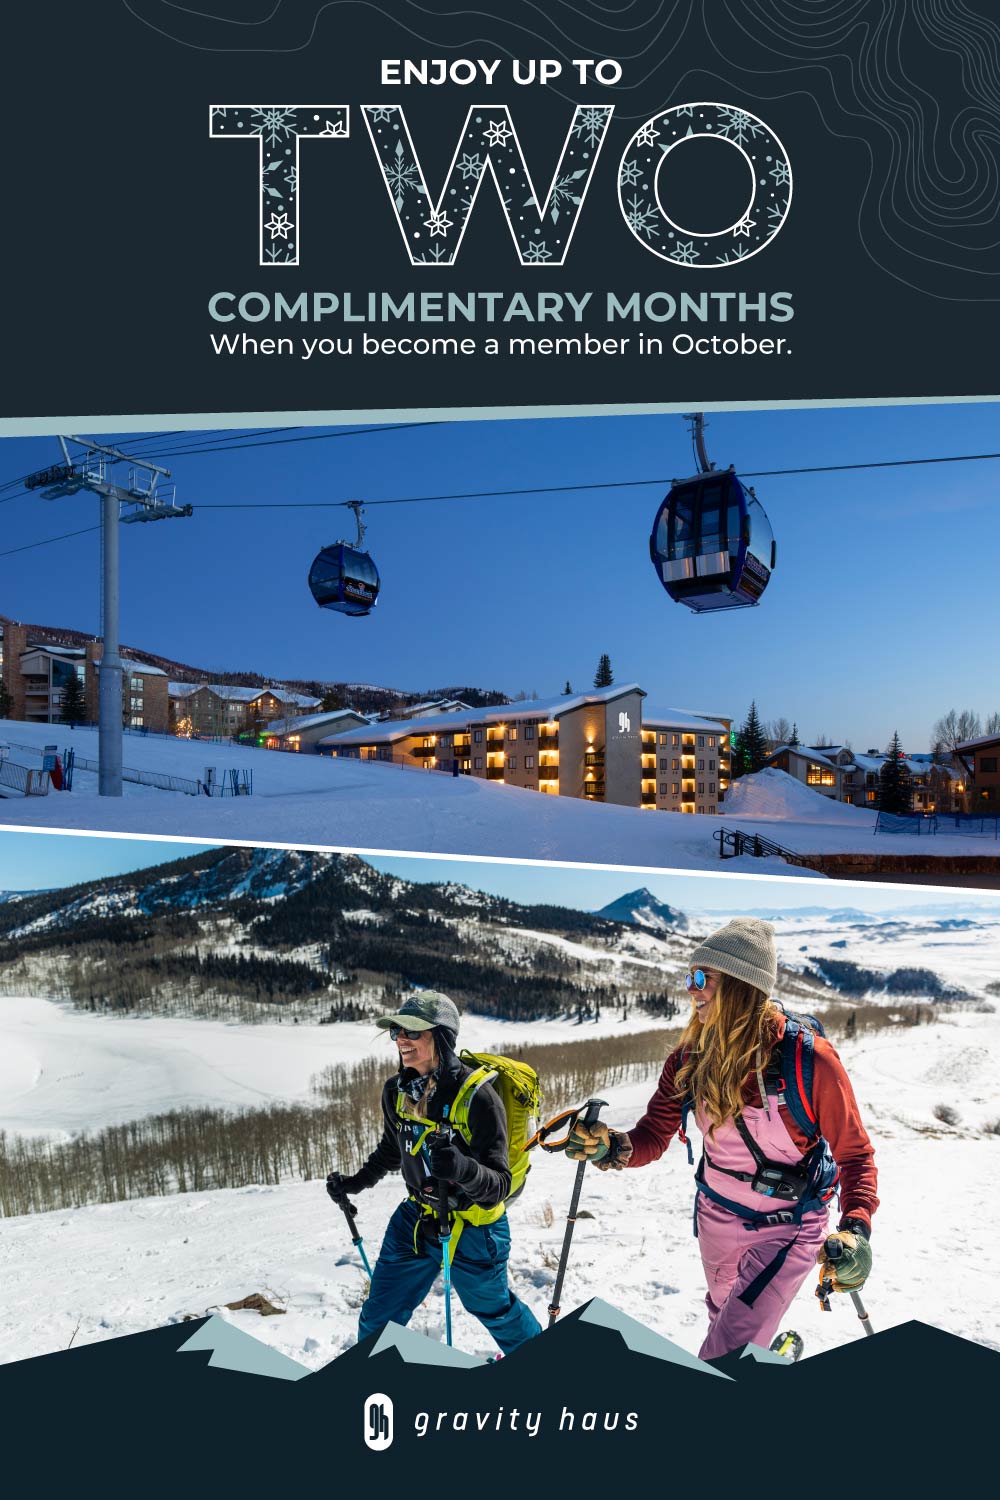 Enjoy up to Two Complimentary Months when you become a Gravity Haus member in October.